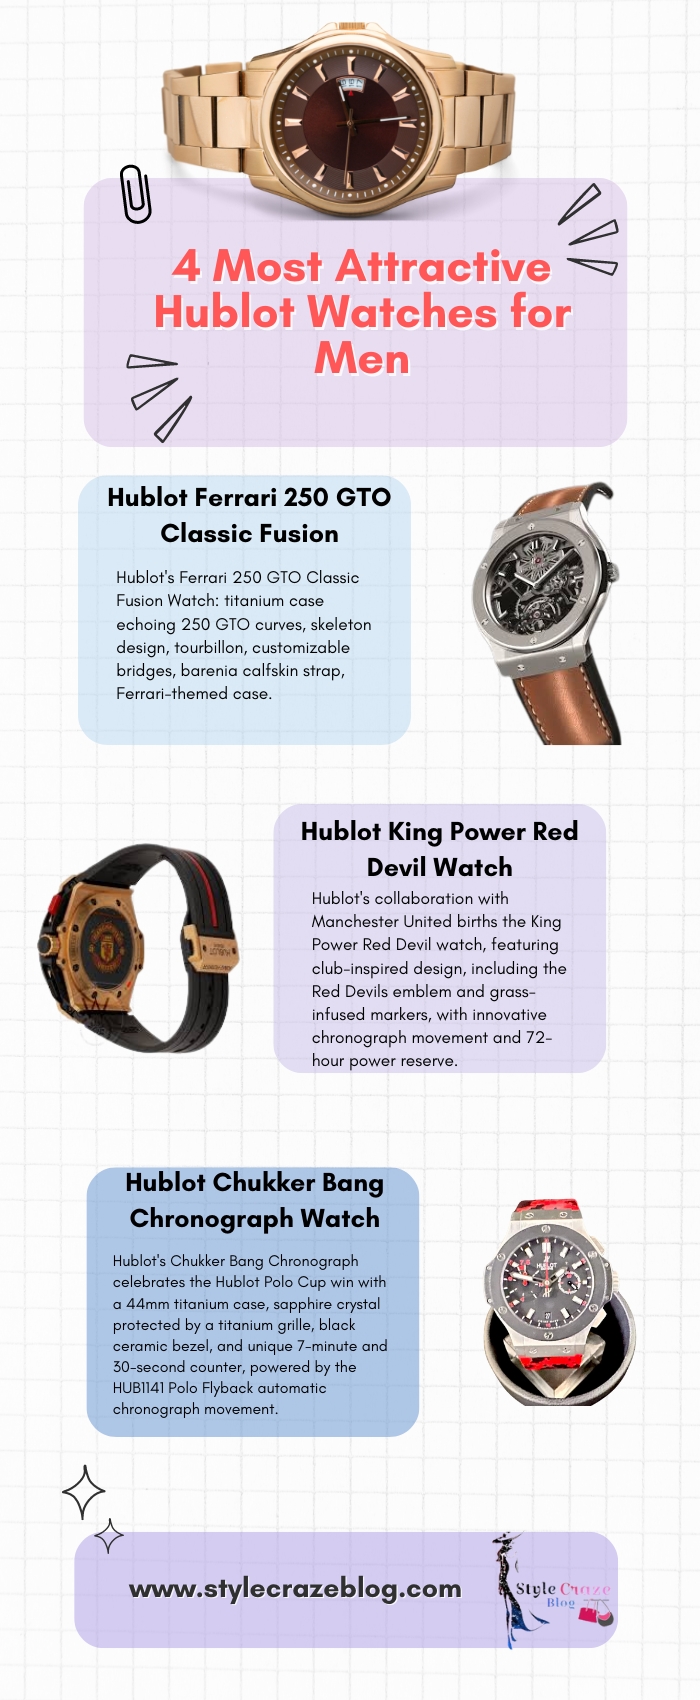 4 Most Attractive Hublot Watches for Men